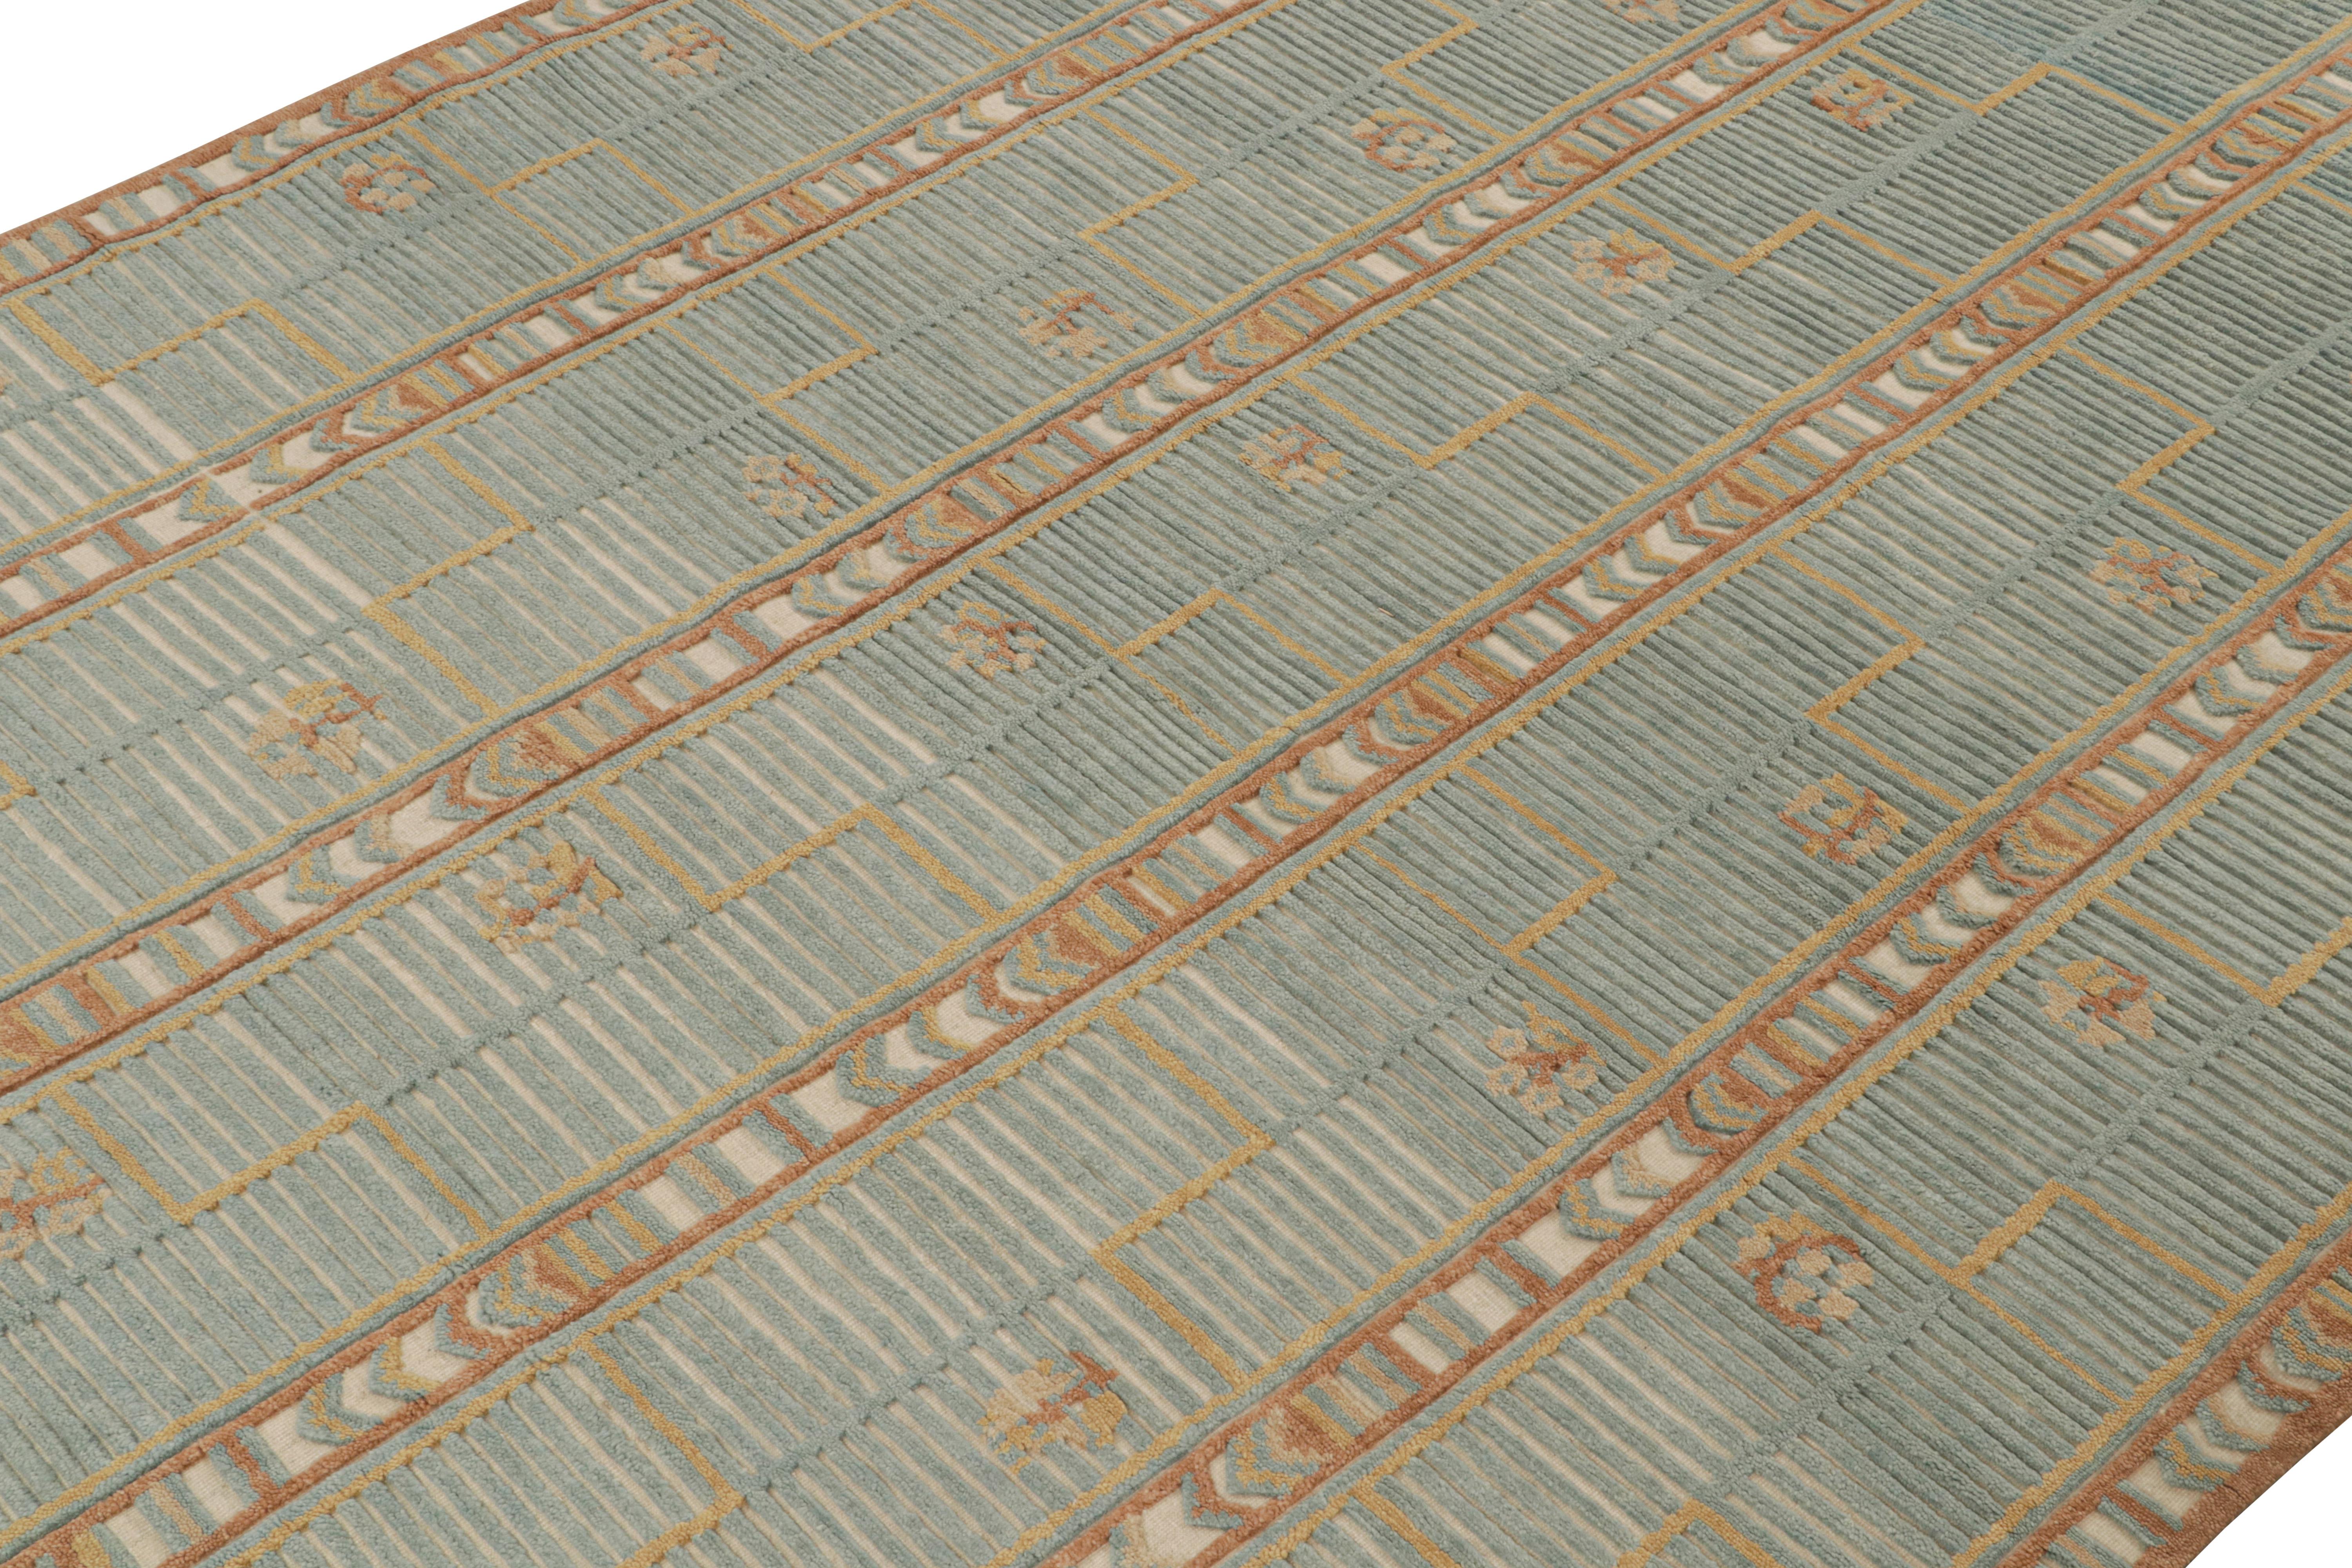 A smart 10x14 Swedish style rug from our award-winning Scandinavian collection. Handknotted in wool. 

On the Design: 

This rug enjoys a subtle high-low texture married to geometric patterns in brown, gold and blue. This proprietary technique